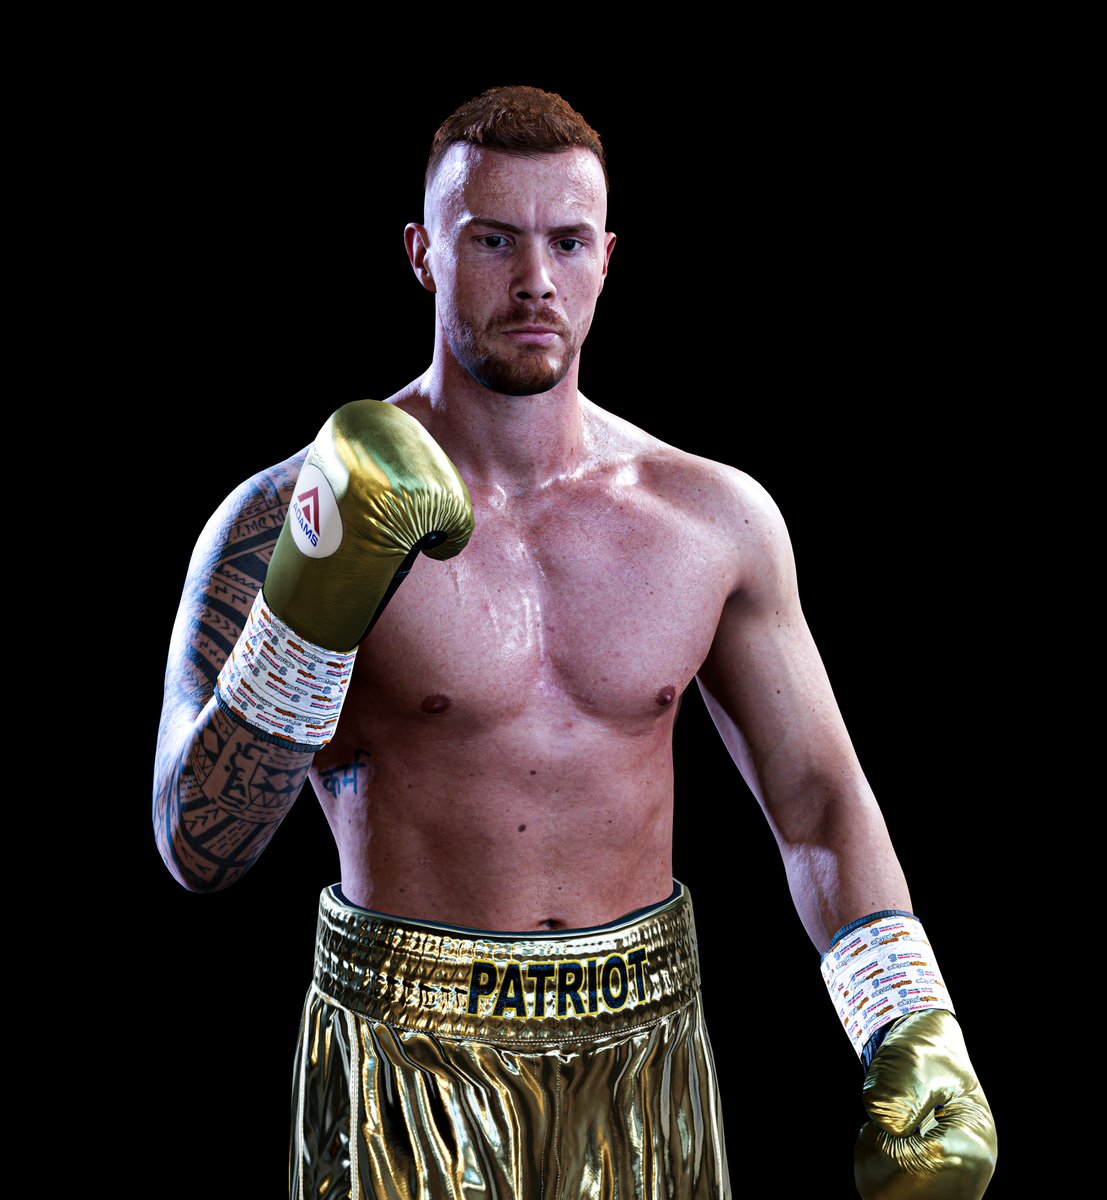 Happy to confirm that 'The Patriot' @RokohlPatrick will be available on Undisputed for day 1 of early access! #BecomeUndisputed 🥊🇩🇪